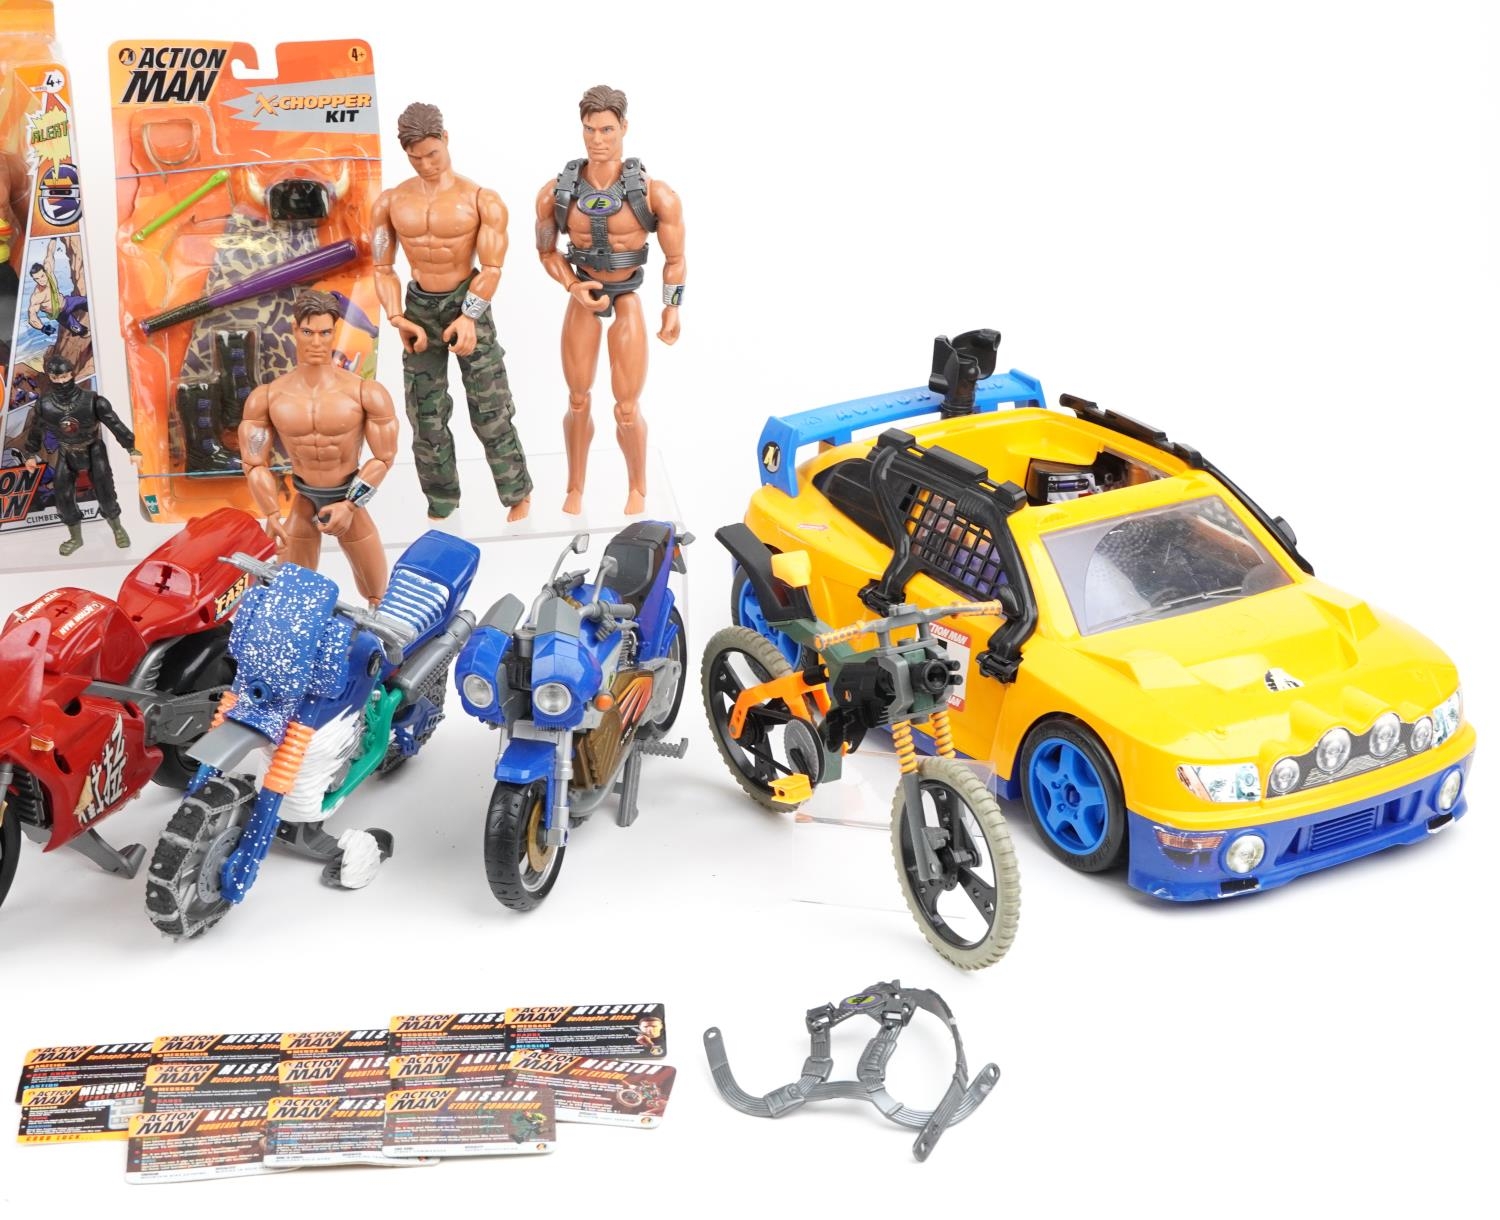 Collection of vintage and later Action Man toys including action figures and vehicles - Image 3 of 3